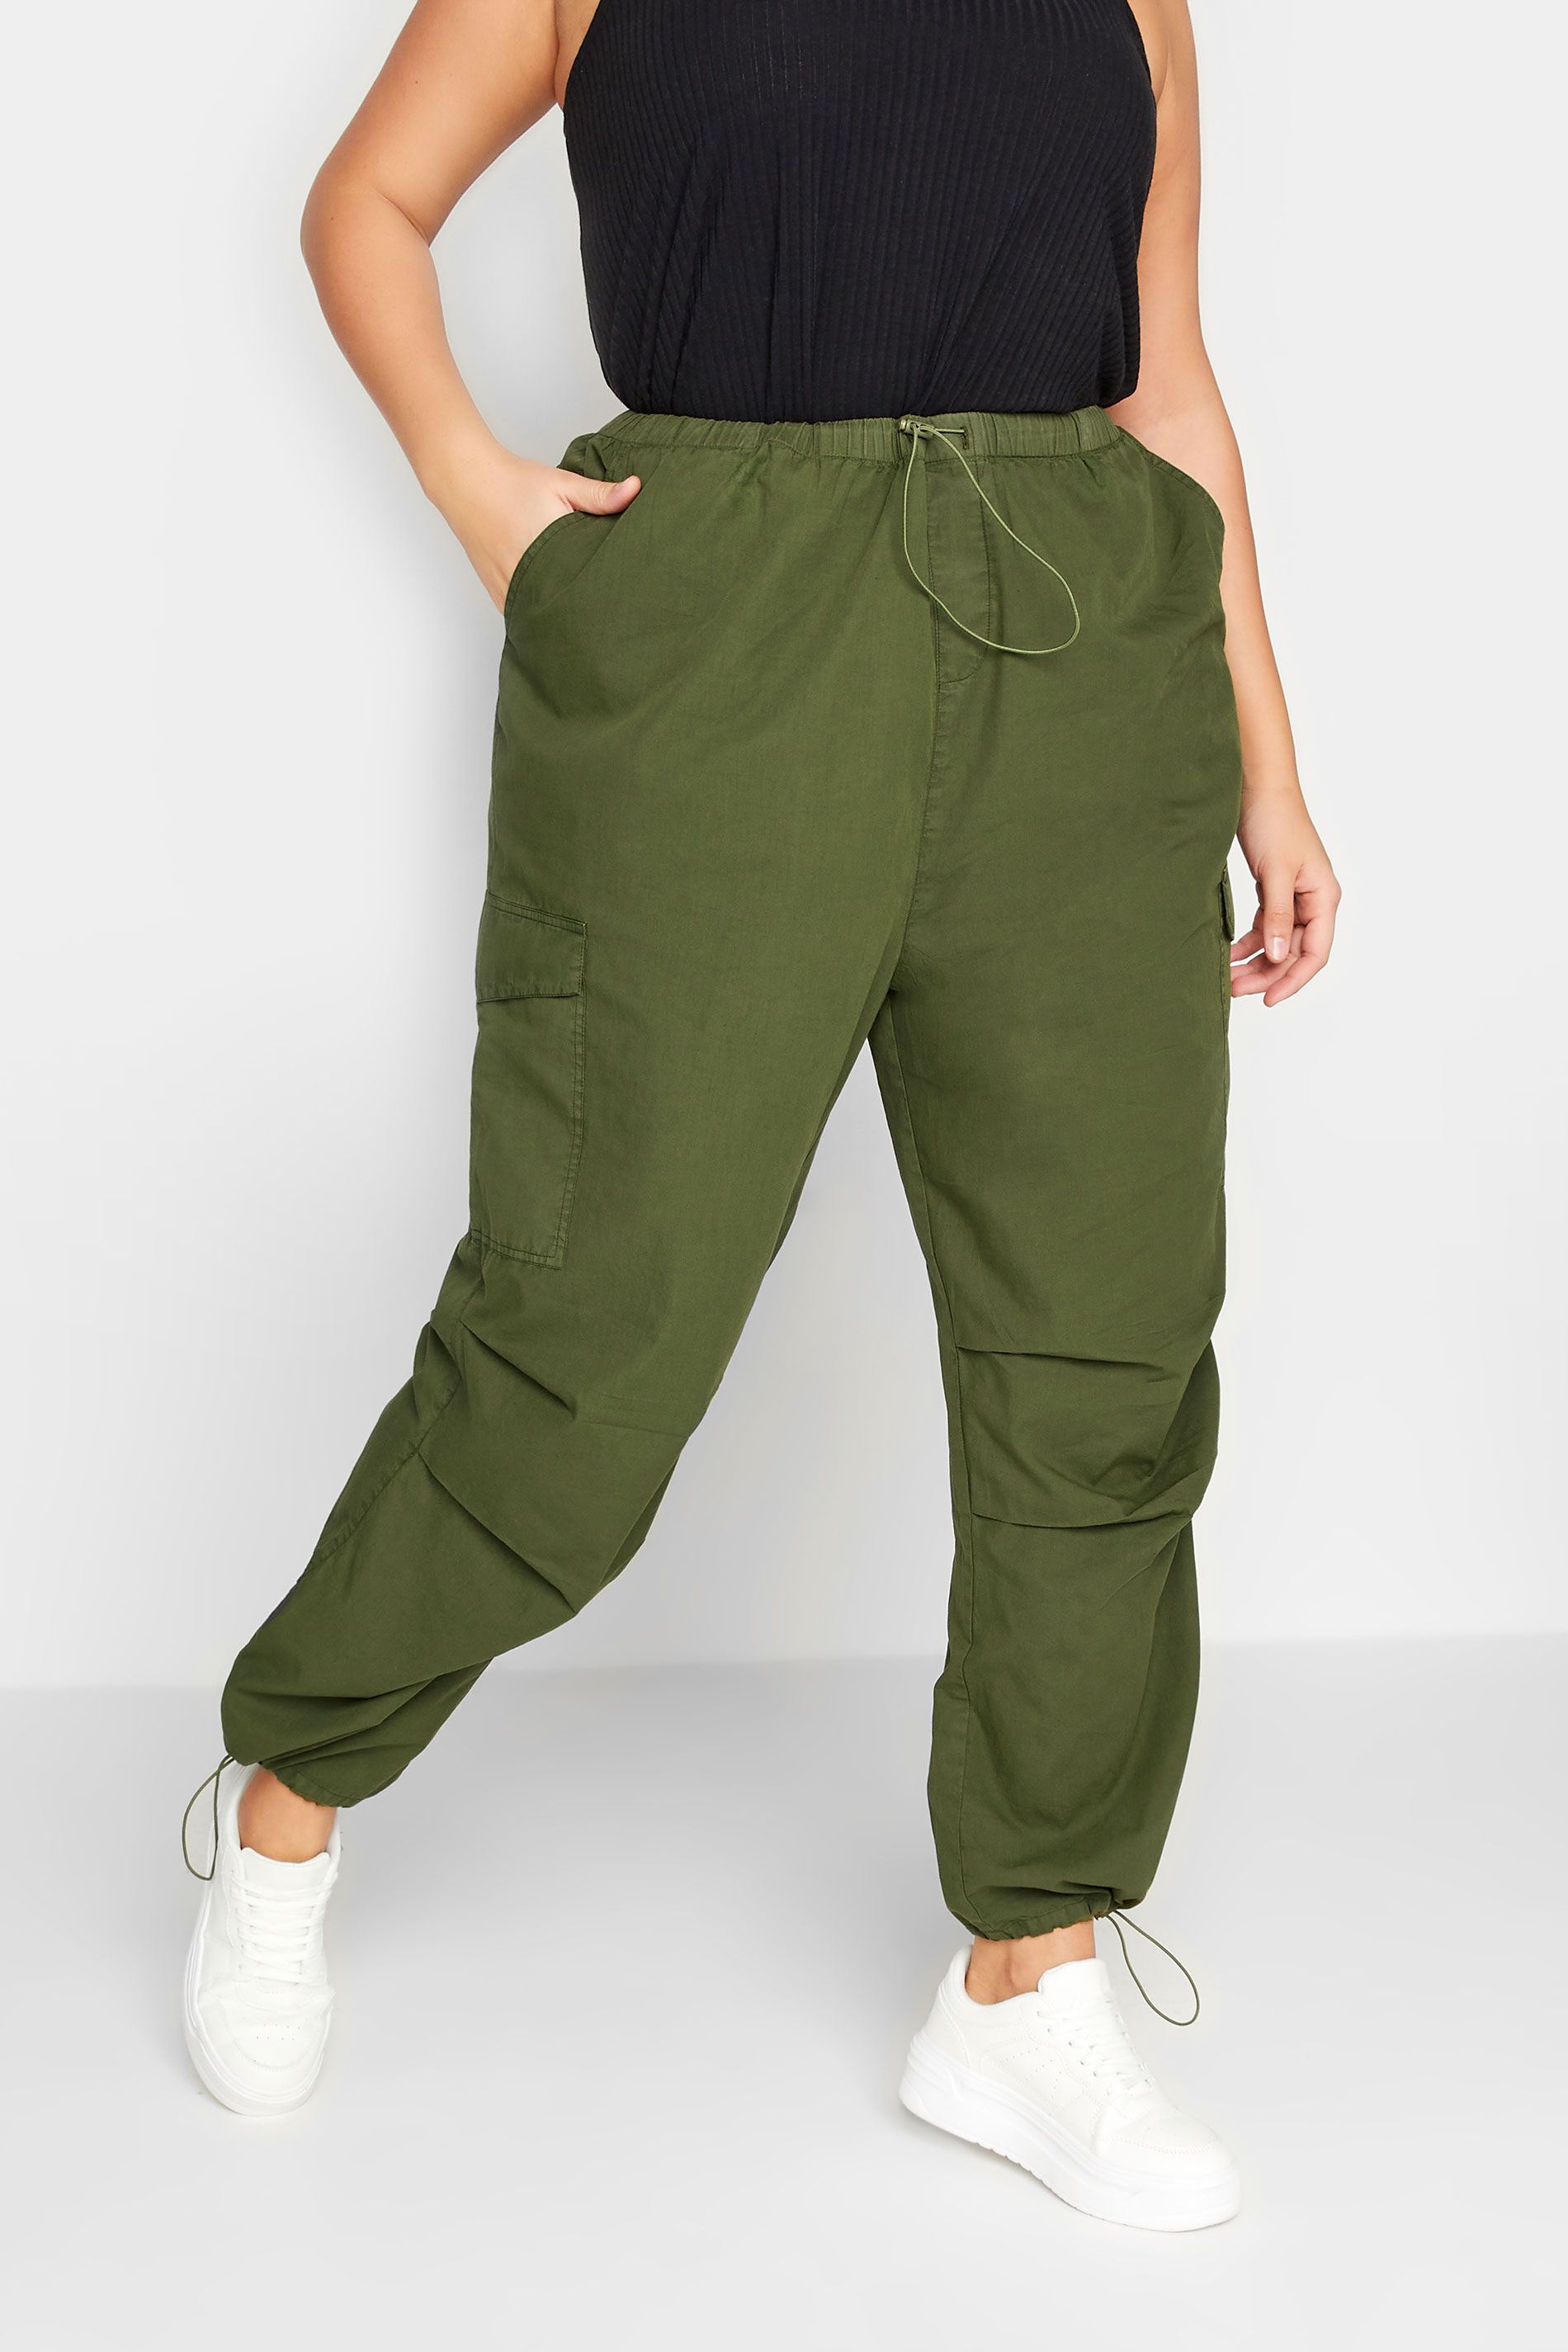 YOURS Curve Plus Size Khaki Green Cargo Parachute Trousers | Yours Clothing  1